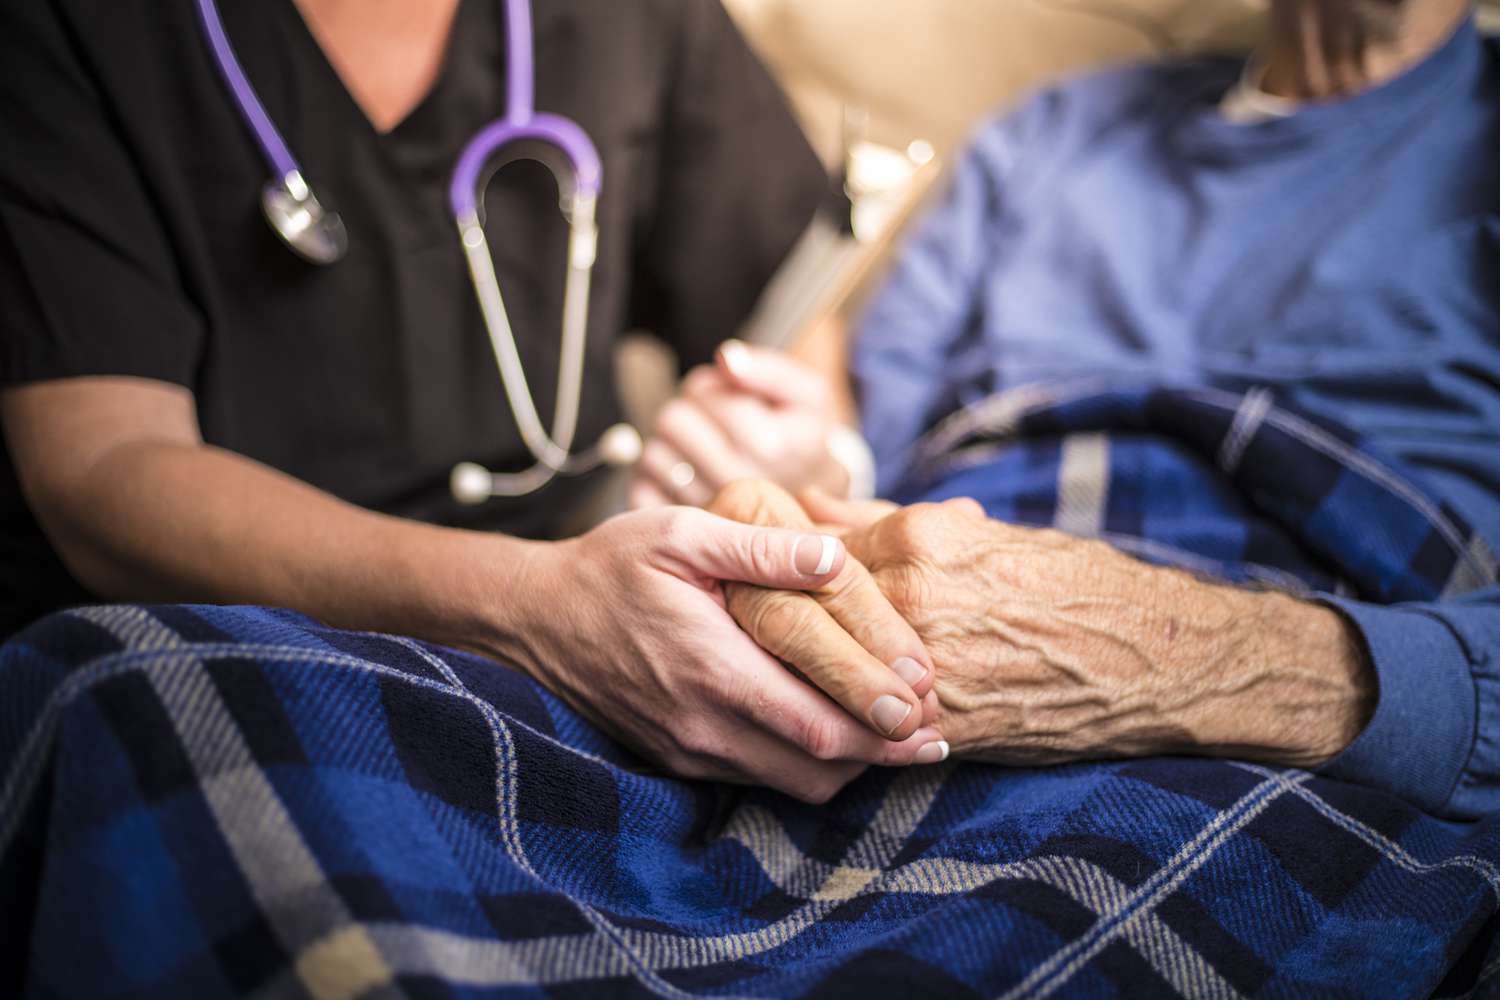 Can patients receive specialized care at Comfort Care Hospice?